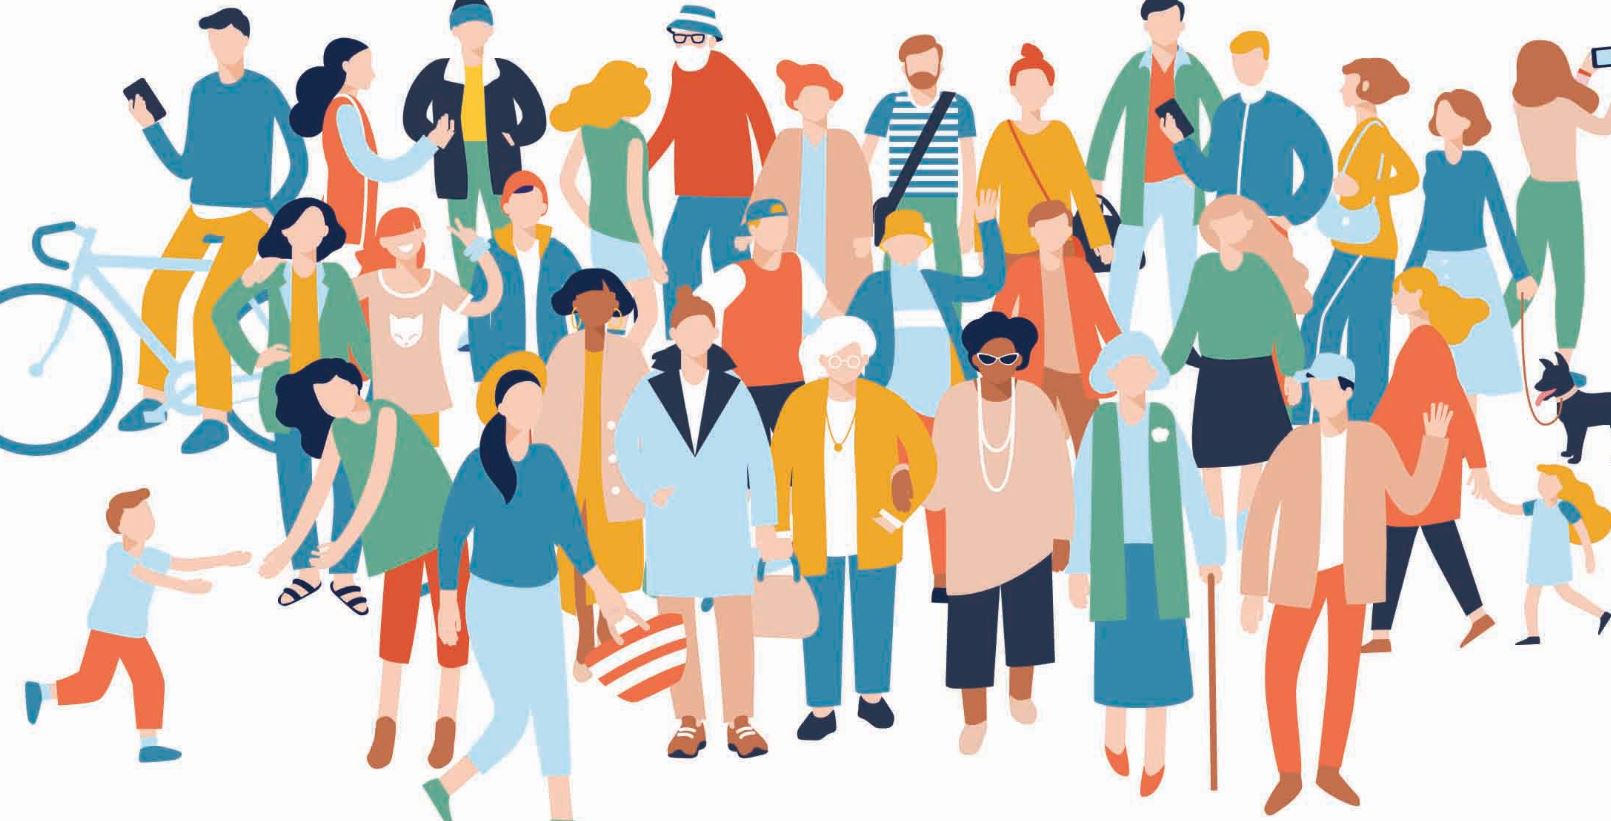  Illustration evoking a modern multicultural society concept by showing a crowd of different people in community 